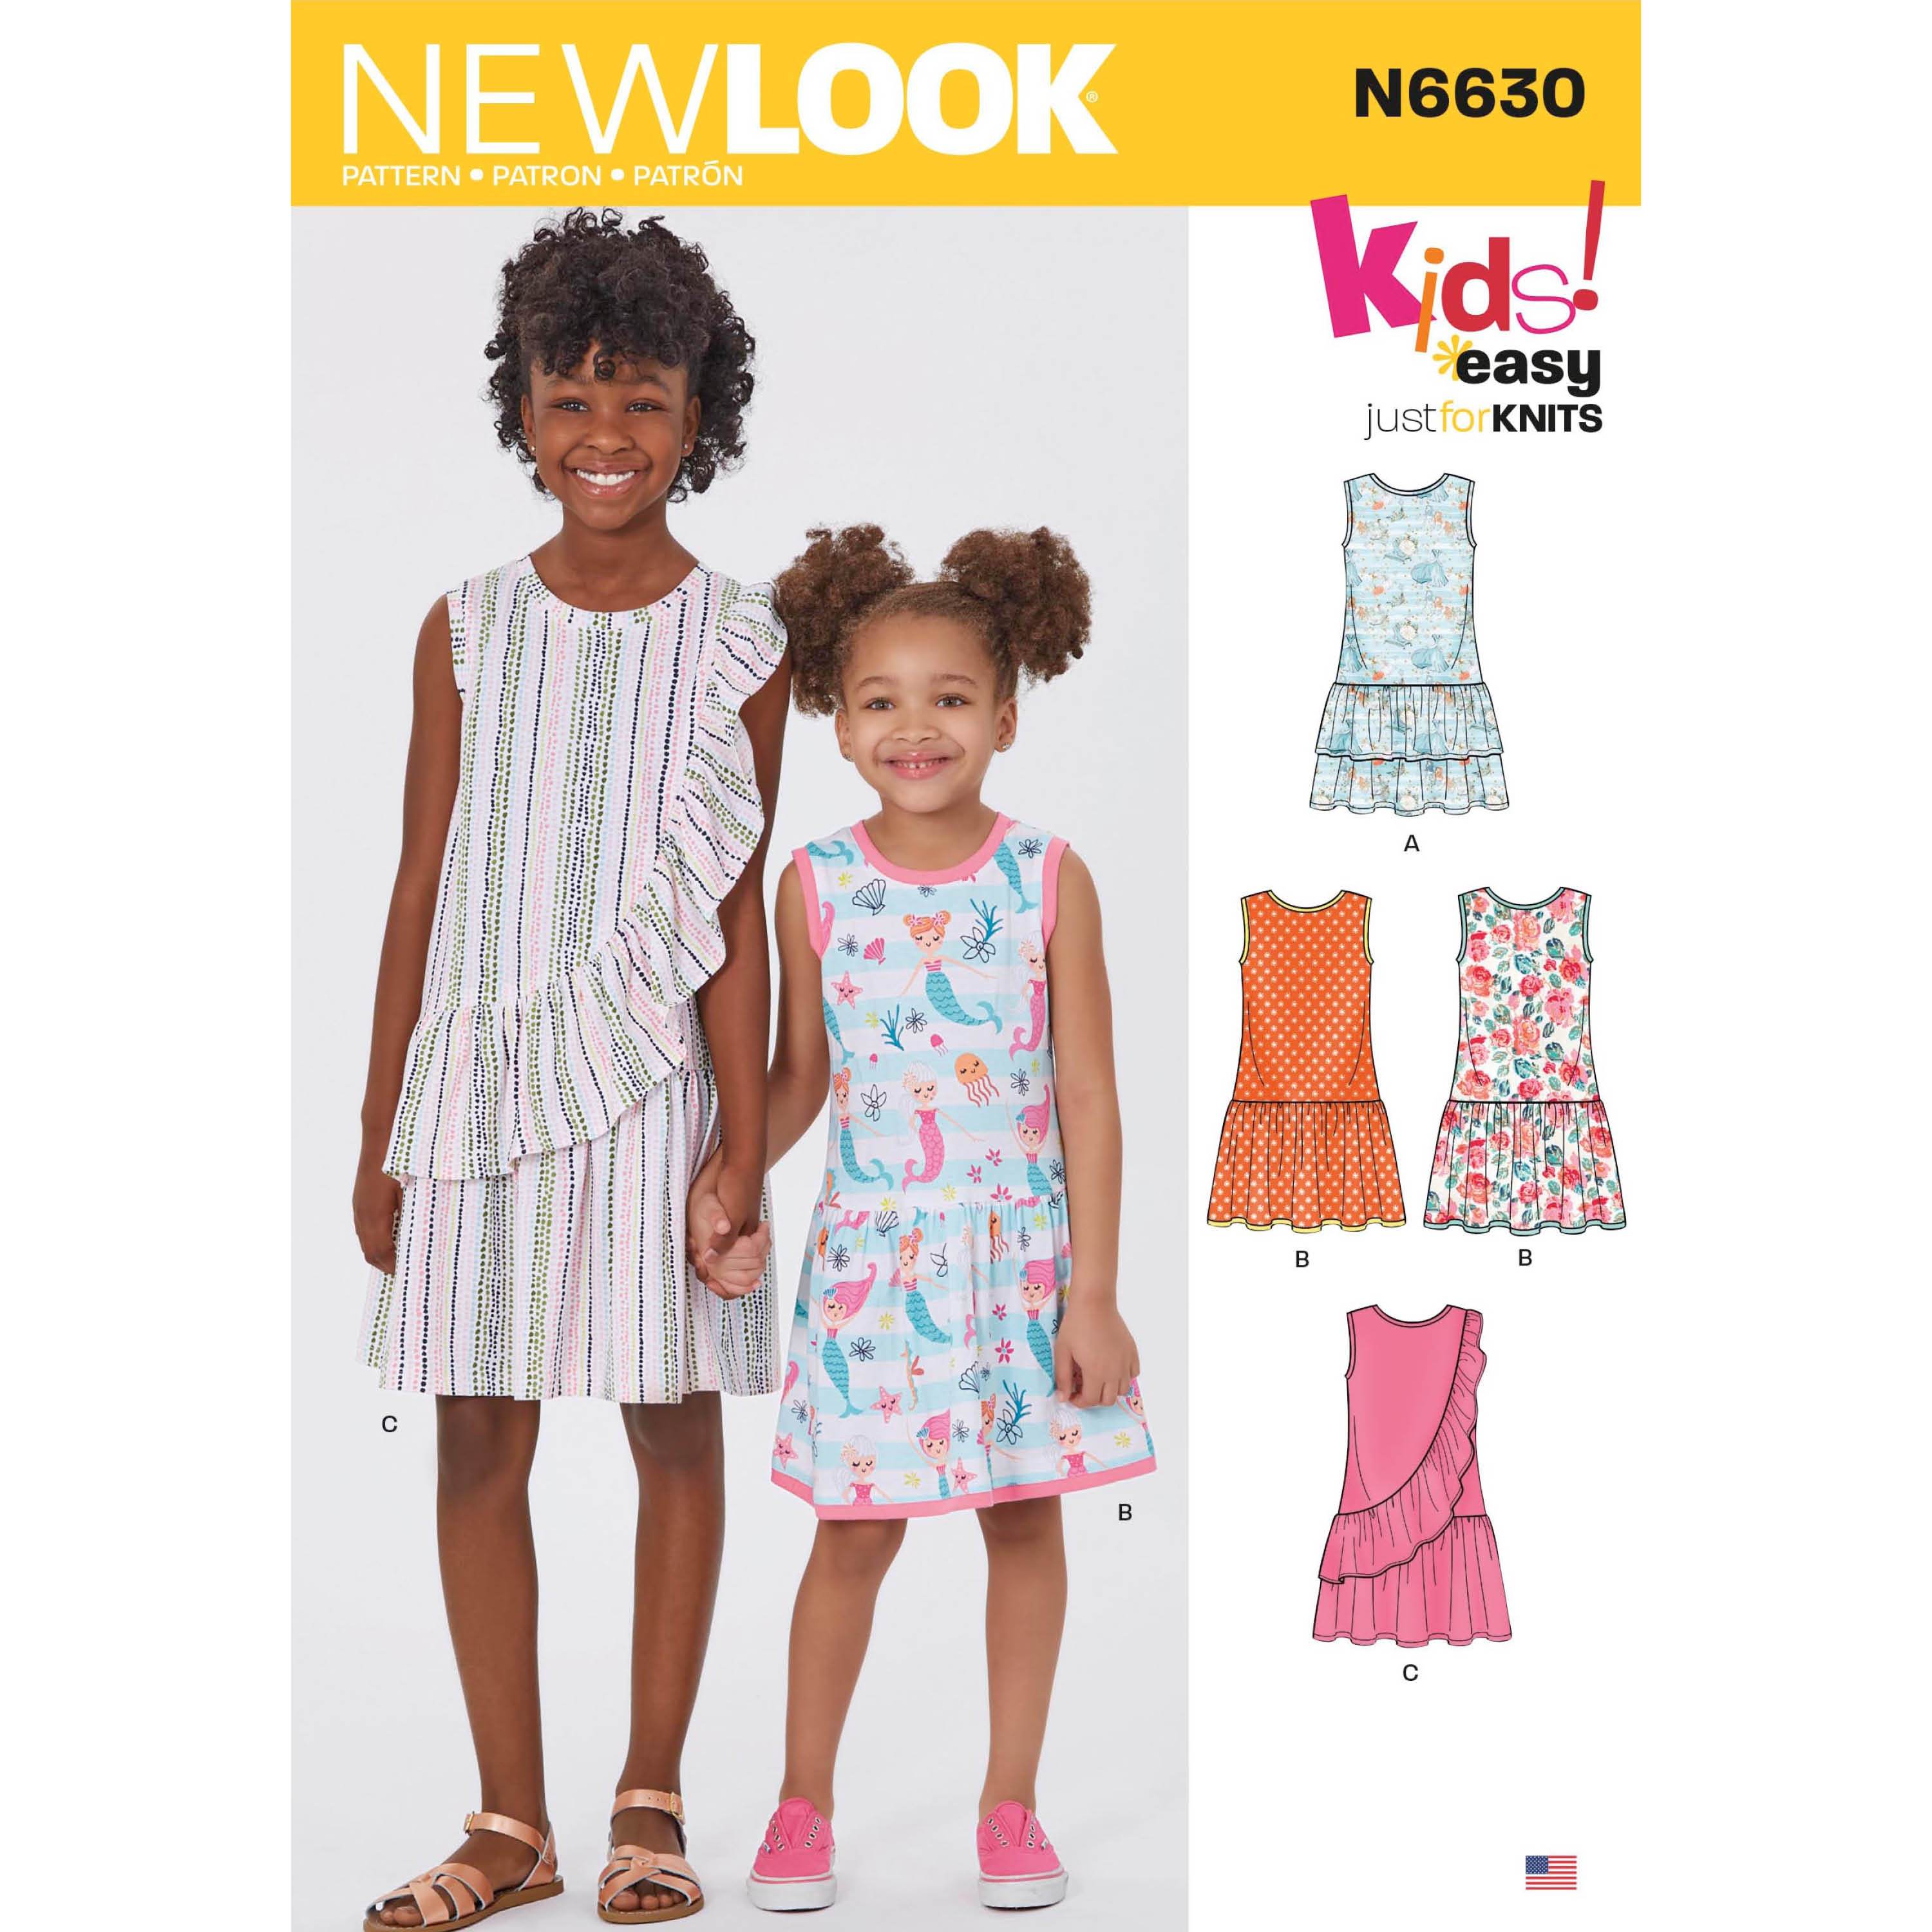 New Look Sewing Pattern 6630 Girls' Dresses from Jaycotts Sewing Supplies